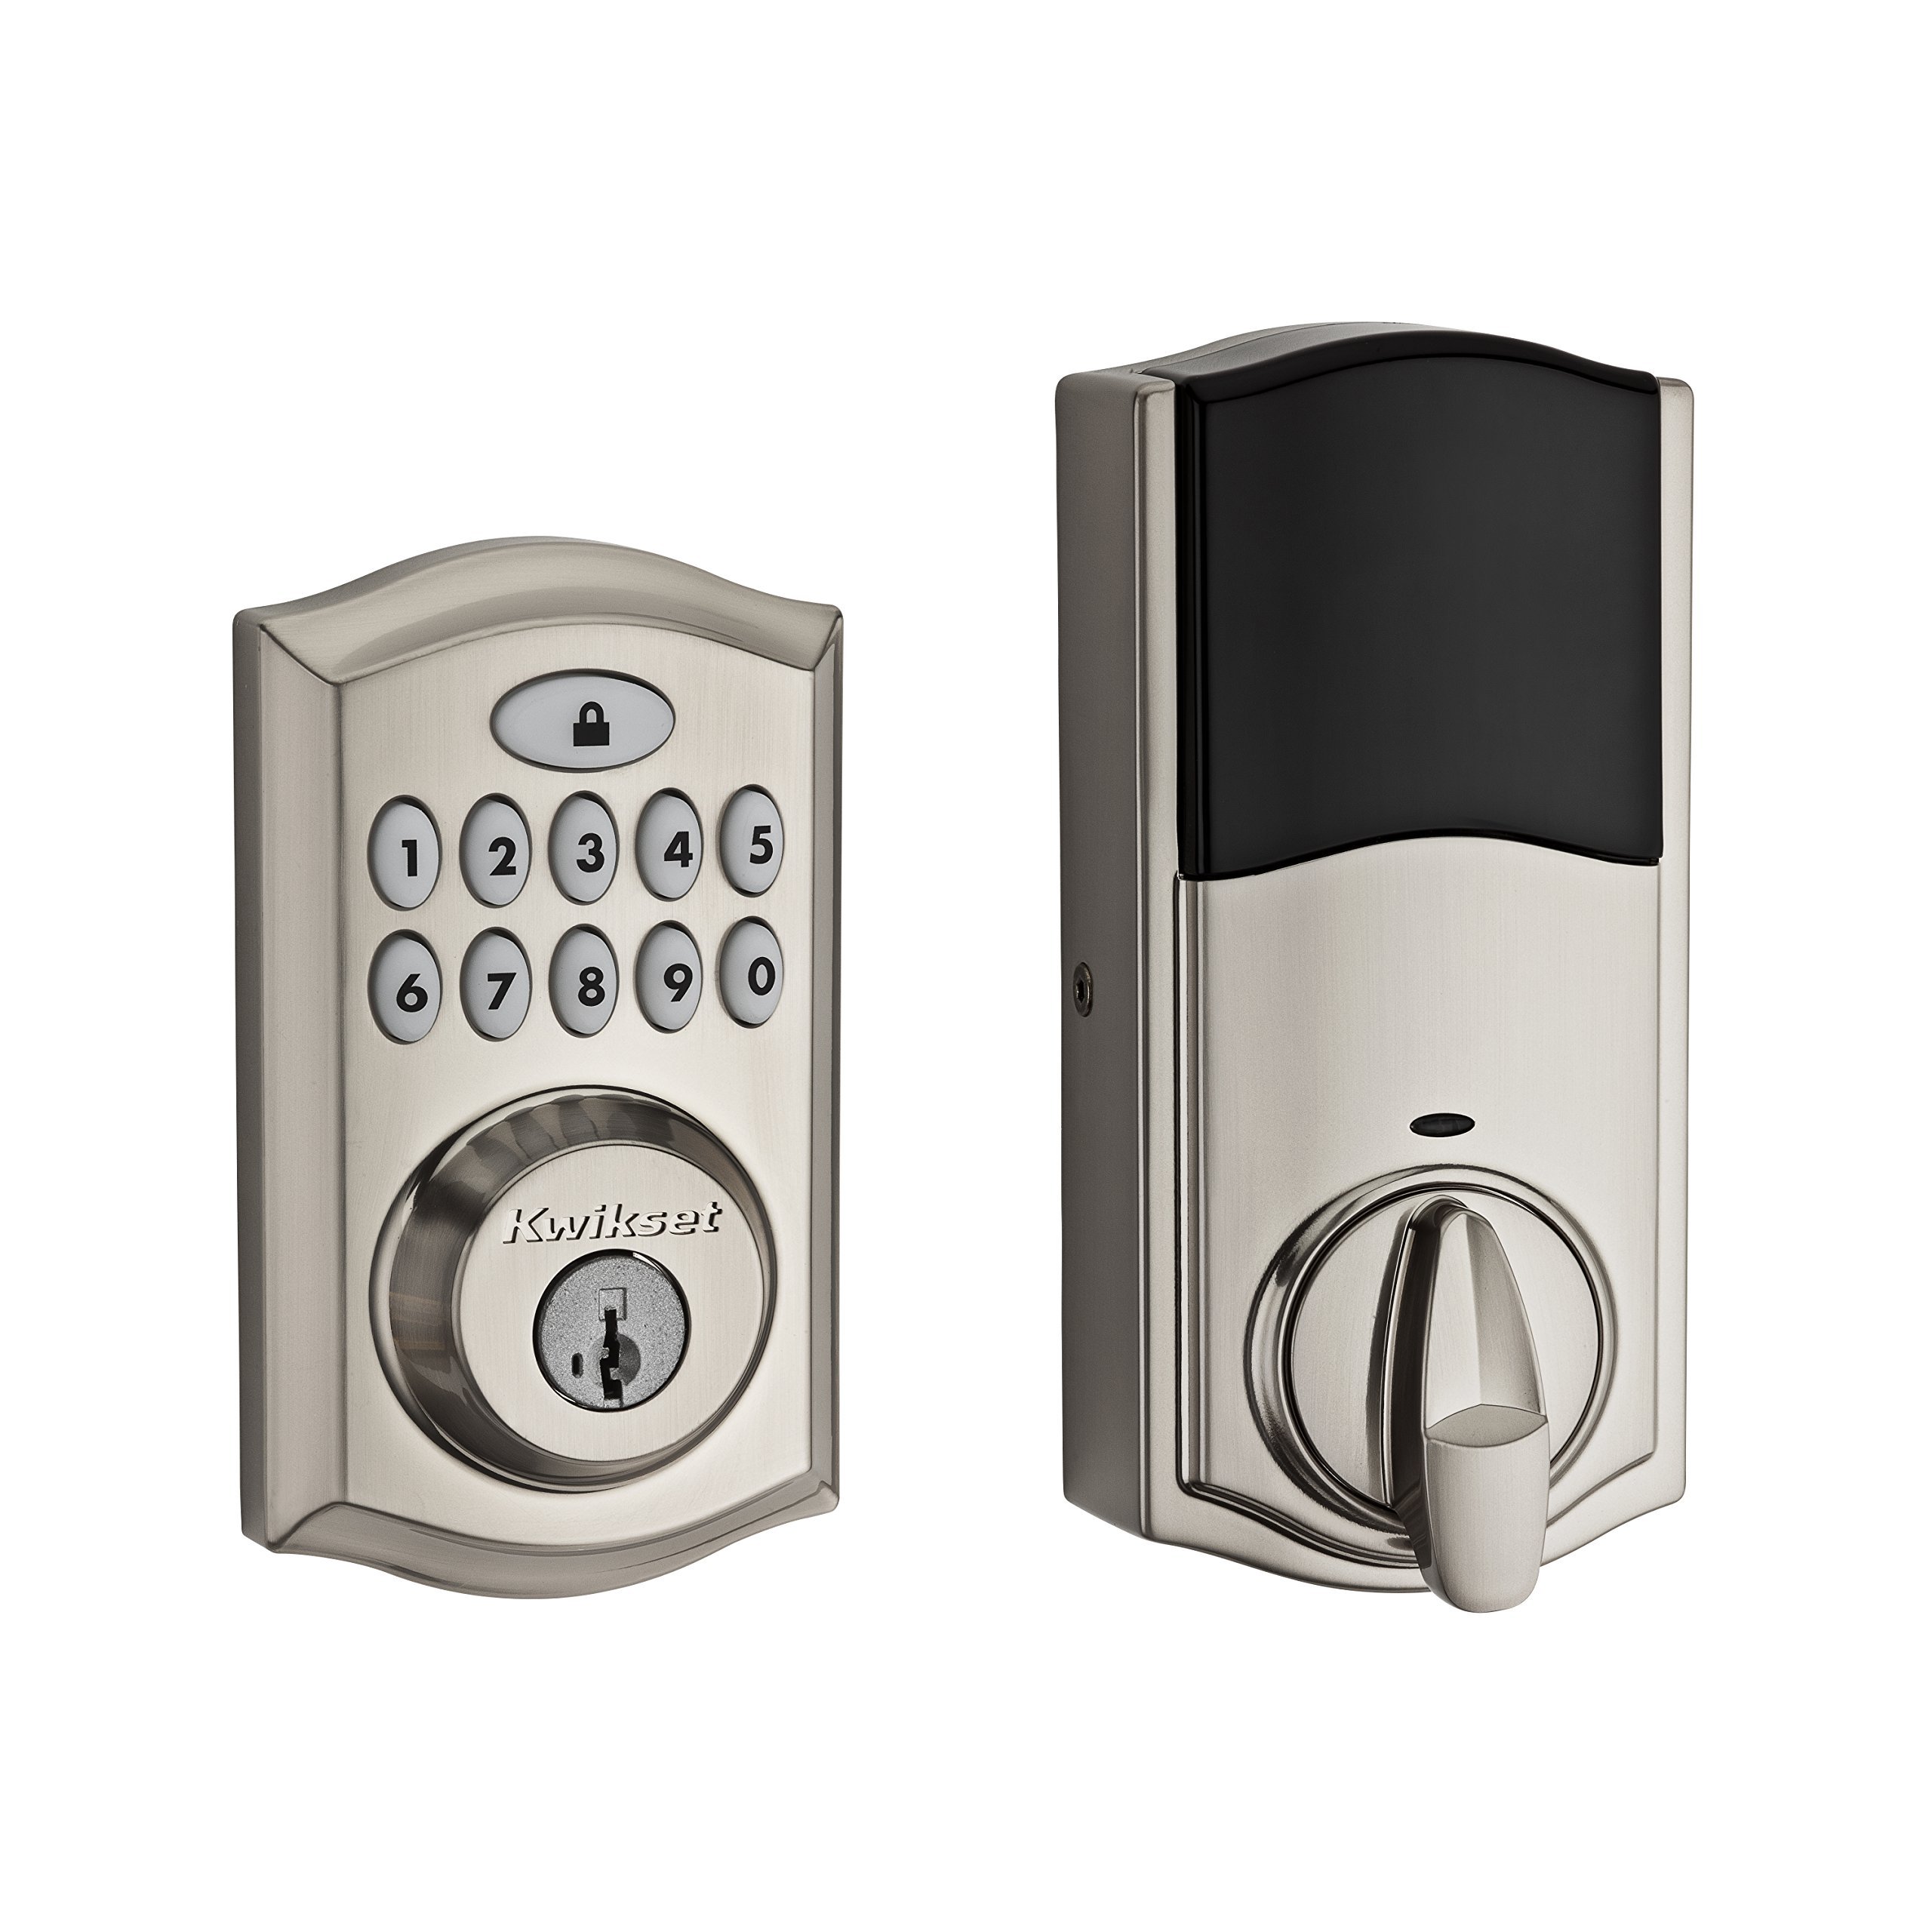 Book Cover Kwikset 99130-002 SmartCode 913 Non-Connected Keyless Entry Electronic Keypad Deadbolt Door Lock Featuring SmartKey Security, Satin Nickel Traditional Satin Nickel